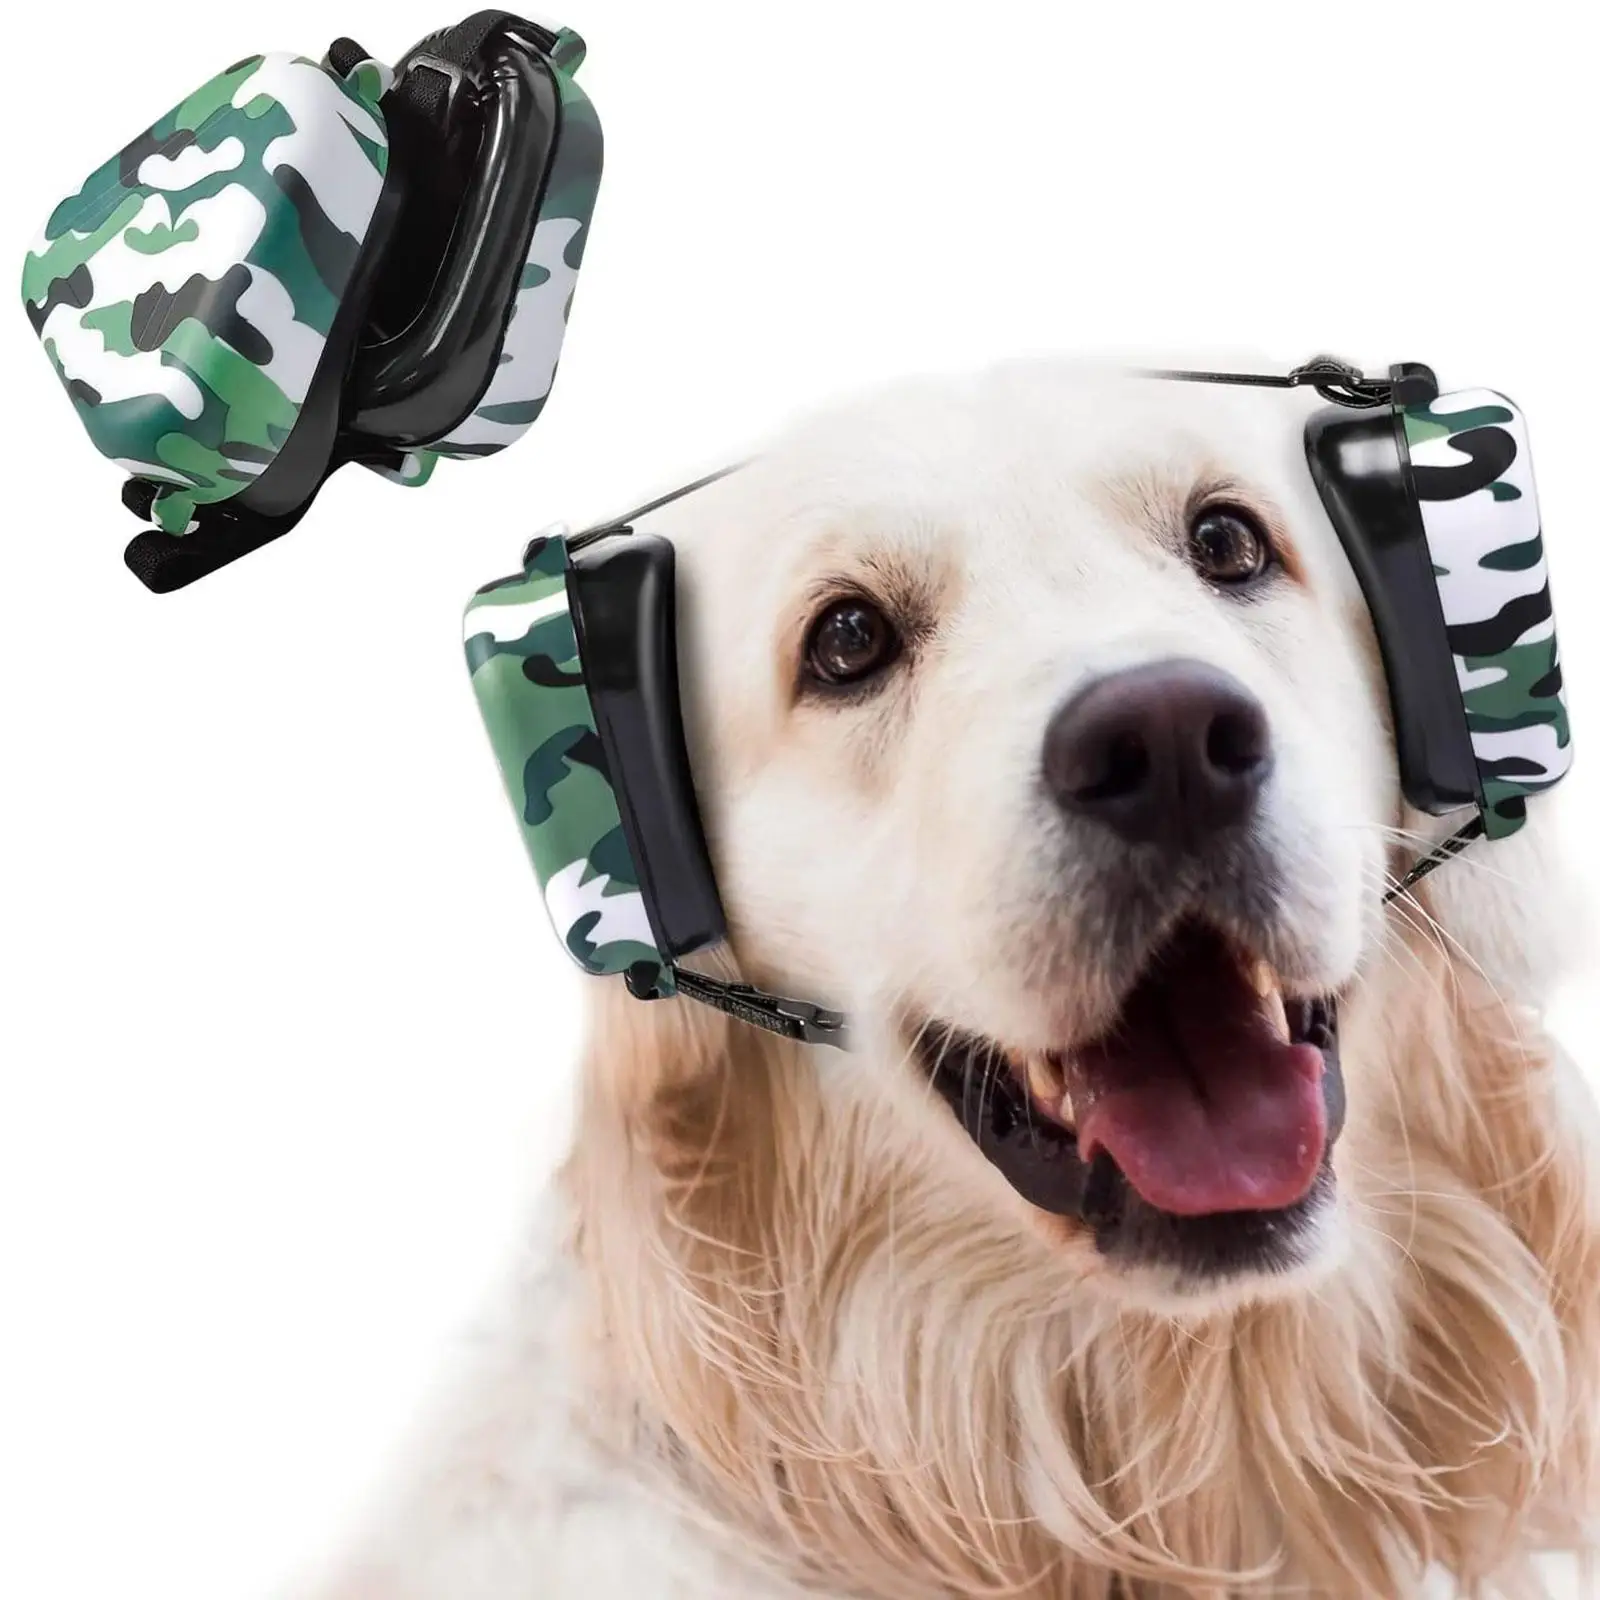 

Pet Dog Cat Grooming Earmuffs Noise Reduction Earmuffs Hearing Protection Pet Ear Cover Winter Windproof Scarf Dogs Supplies